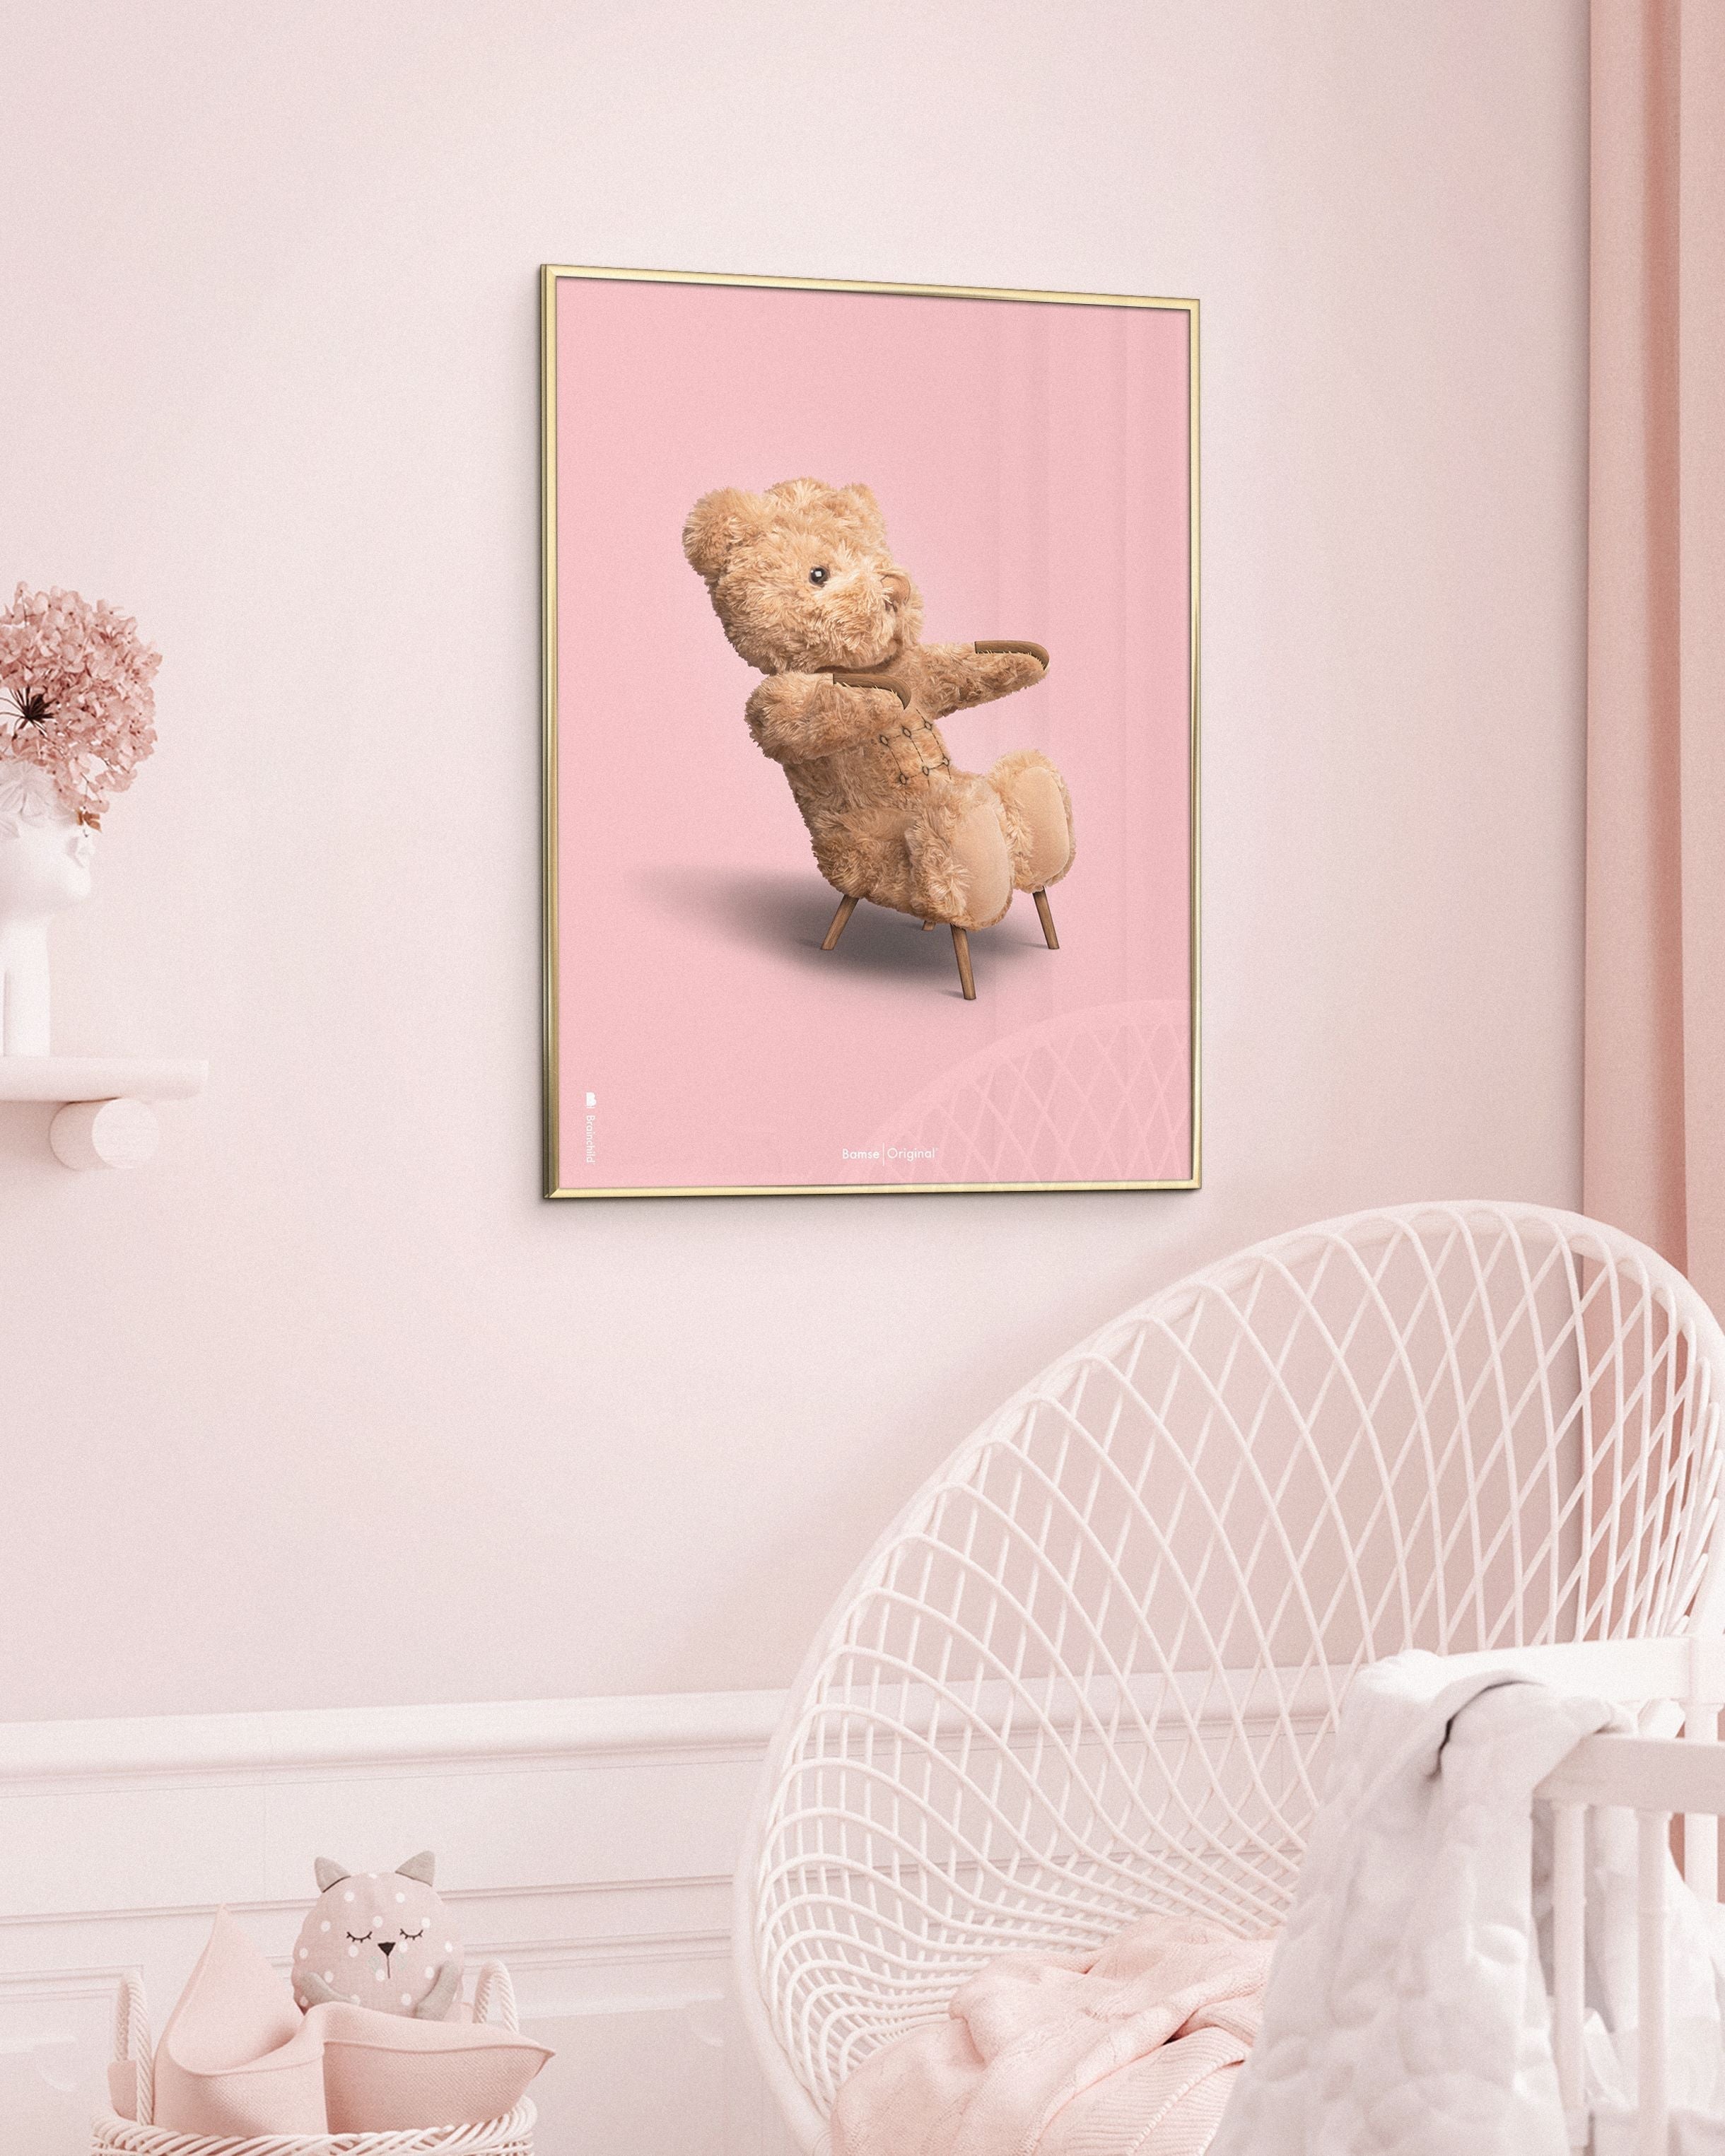 Brainchild Teddy Bear Classic Poster Brass Colored Frame 50x70 Cm, Pink Background